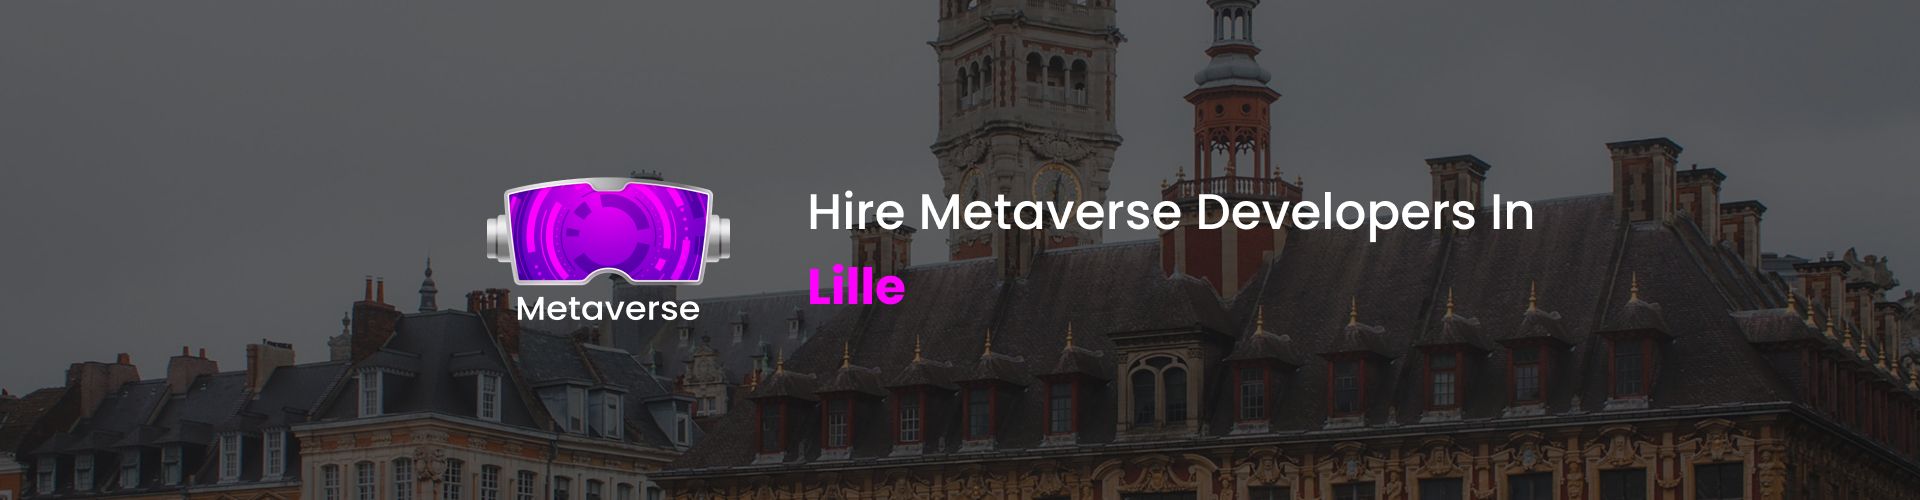 metaverse developers in lille